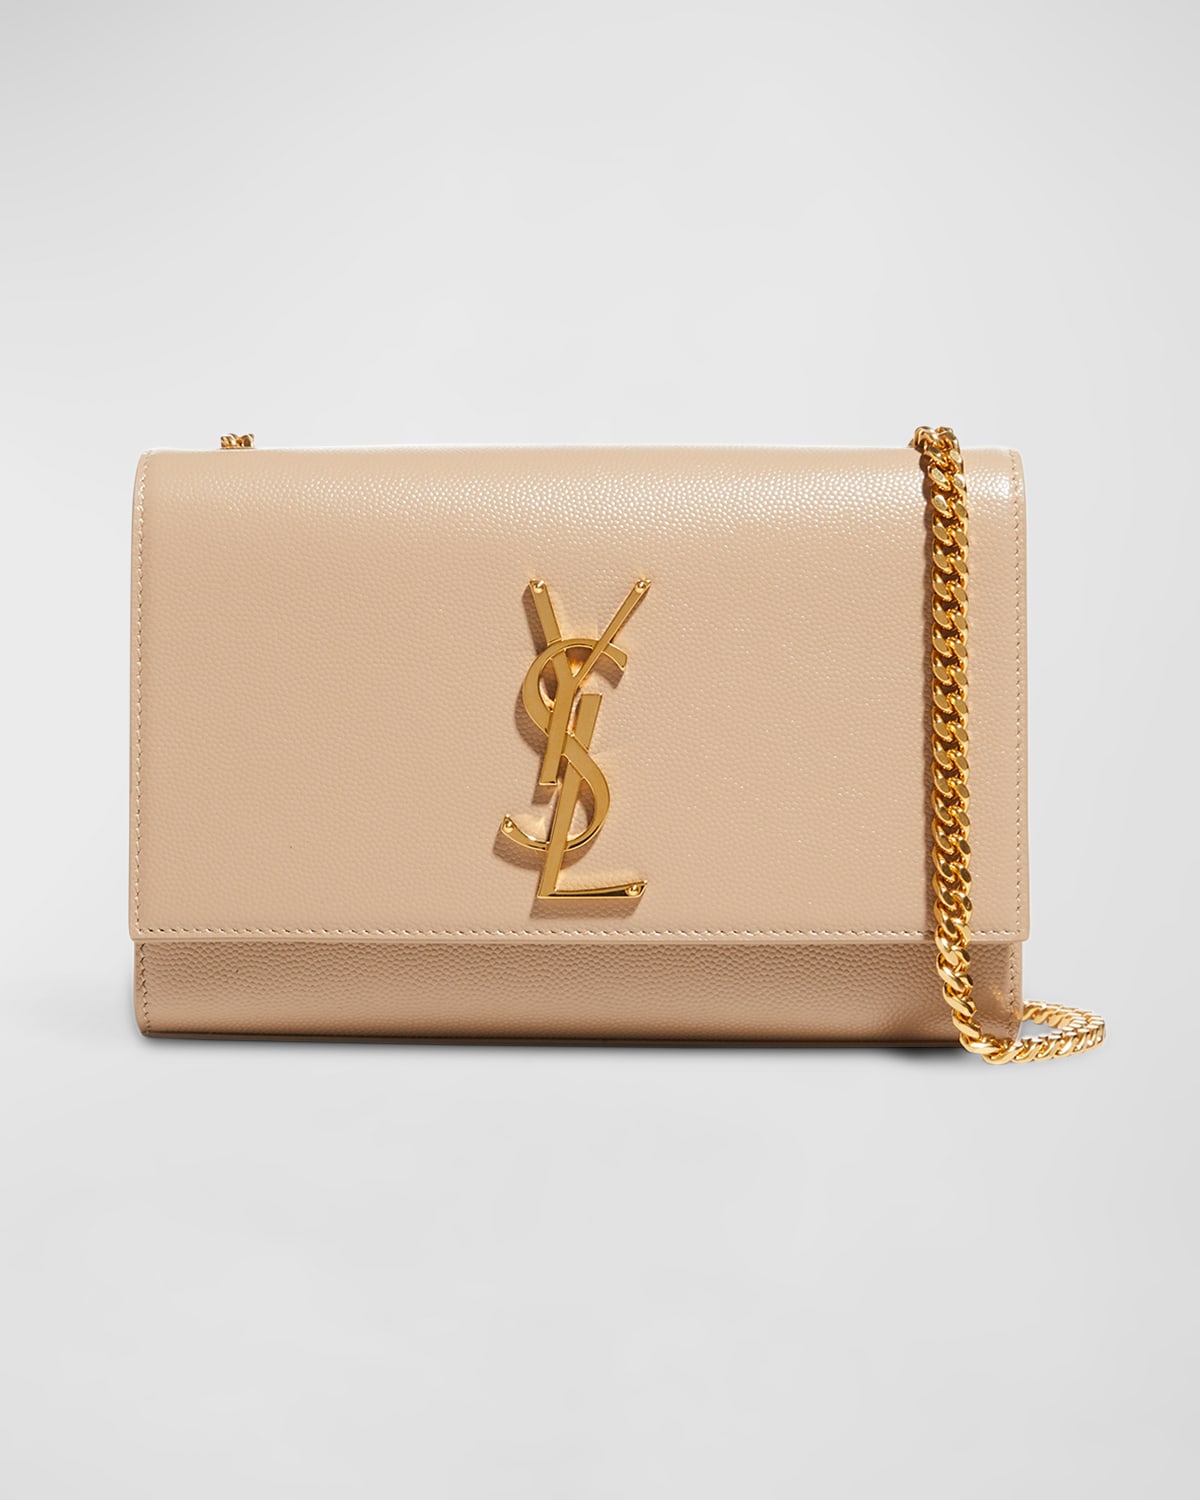 SAINT LAURENT KATE SMALL YSL CROSSBODY BAG IN GRAINED LEATHER